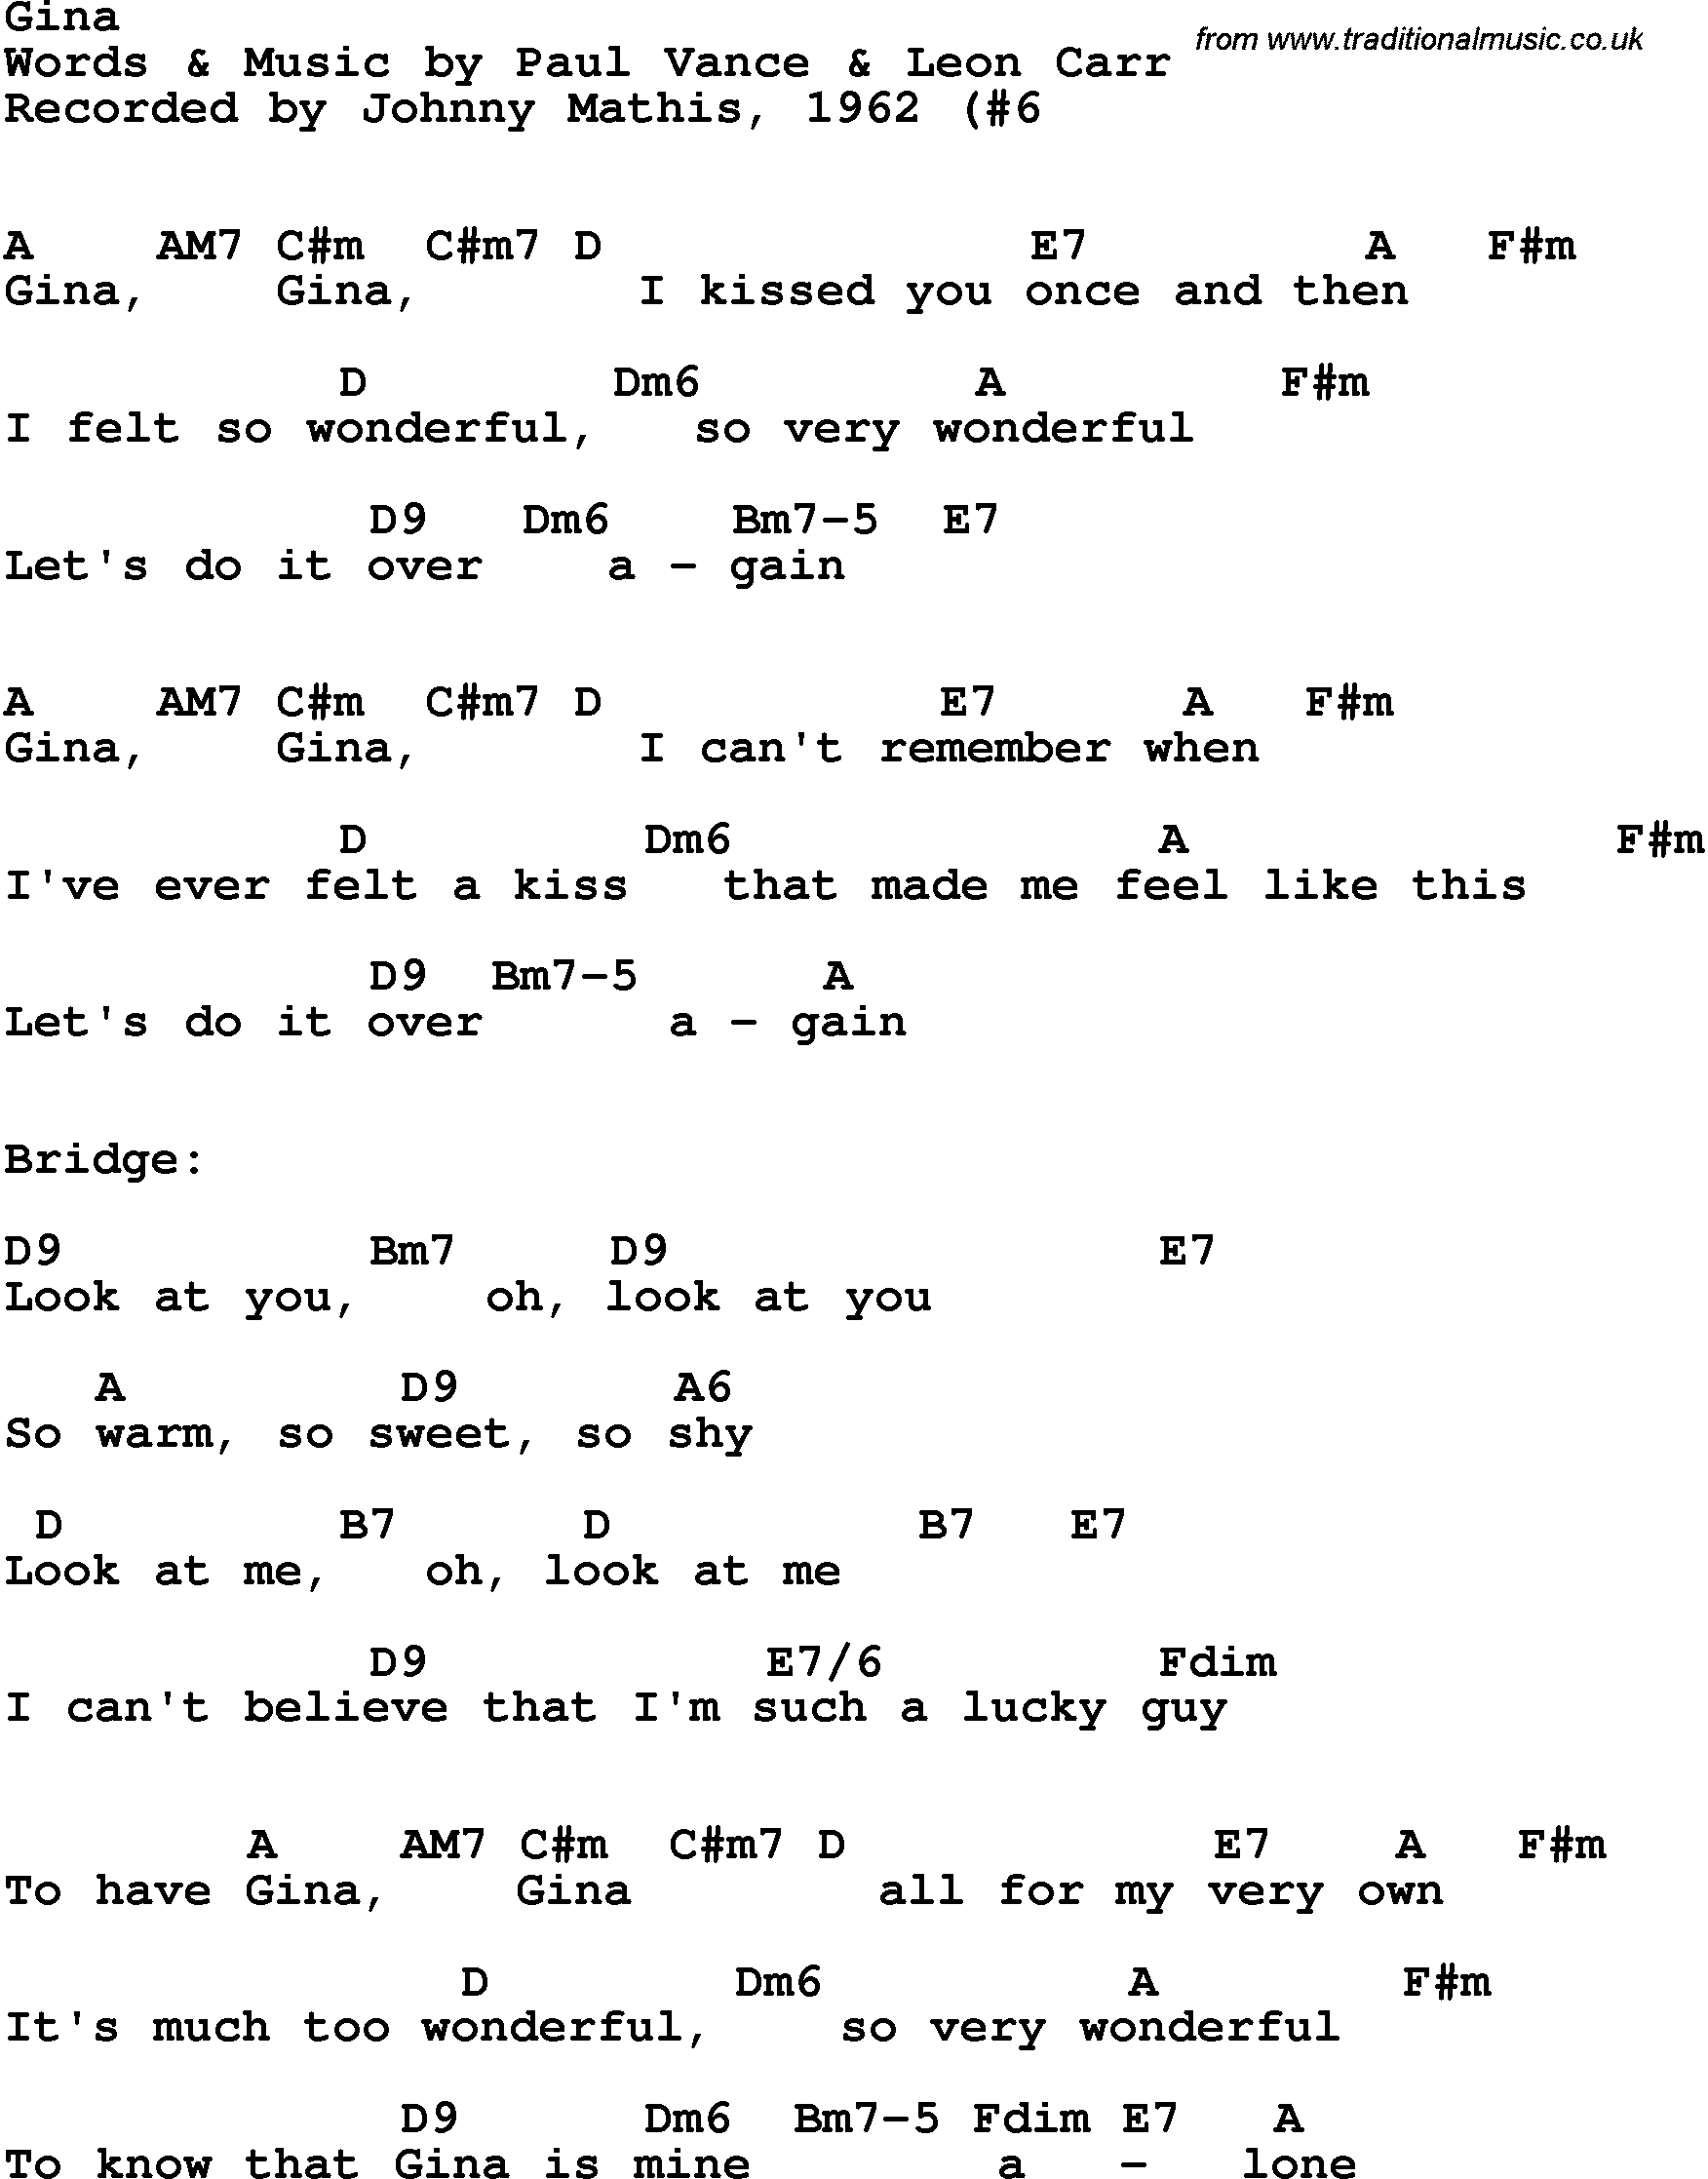 Song Lyrics with guitar chords for Gina - Johnny Mathis, 1962